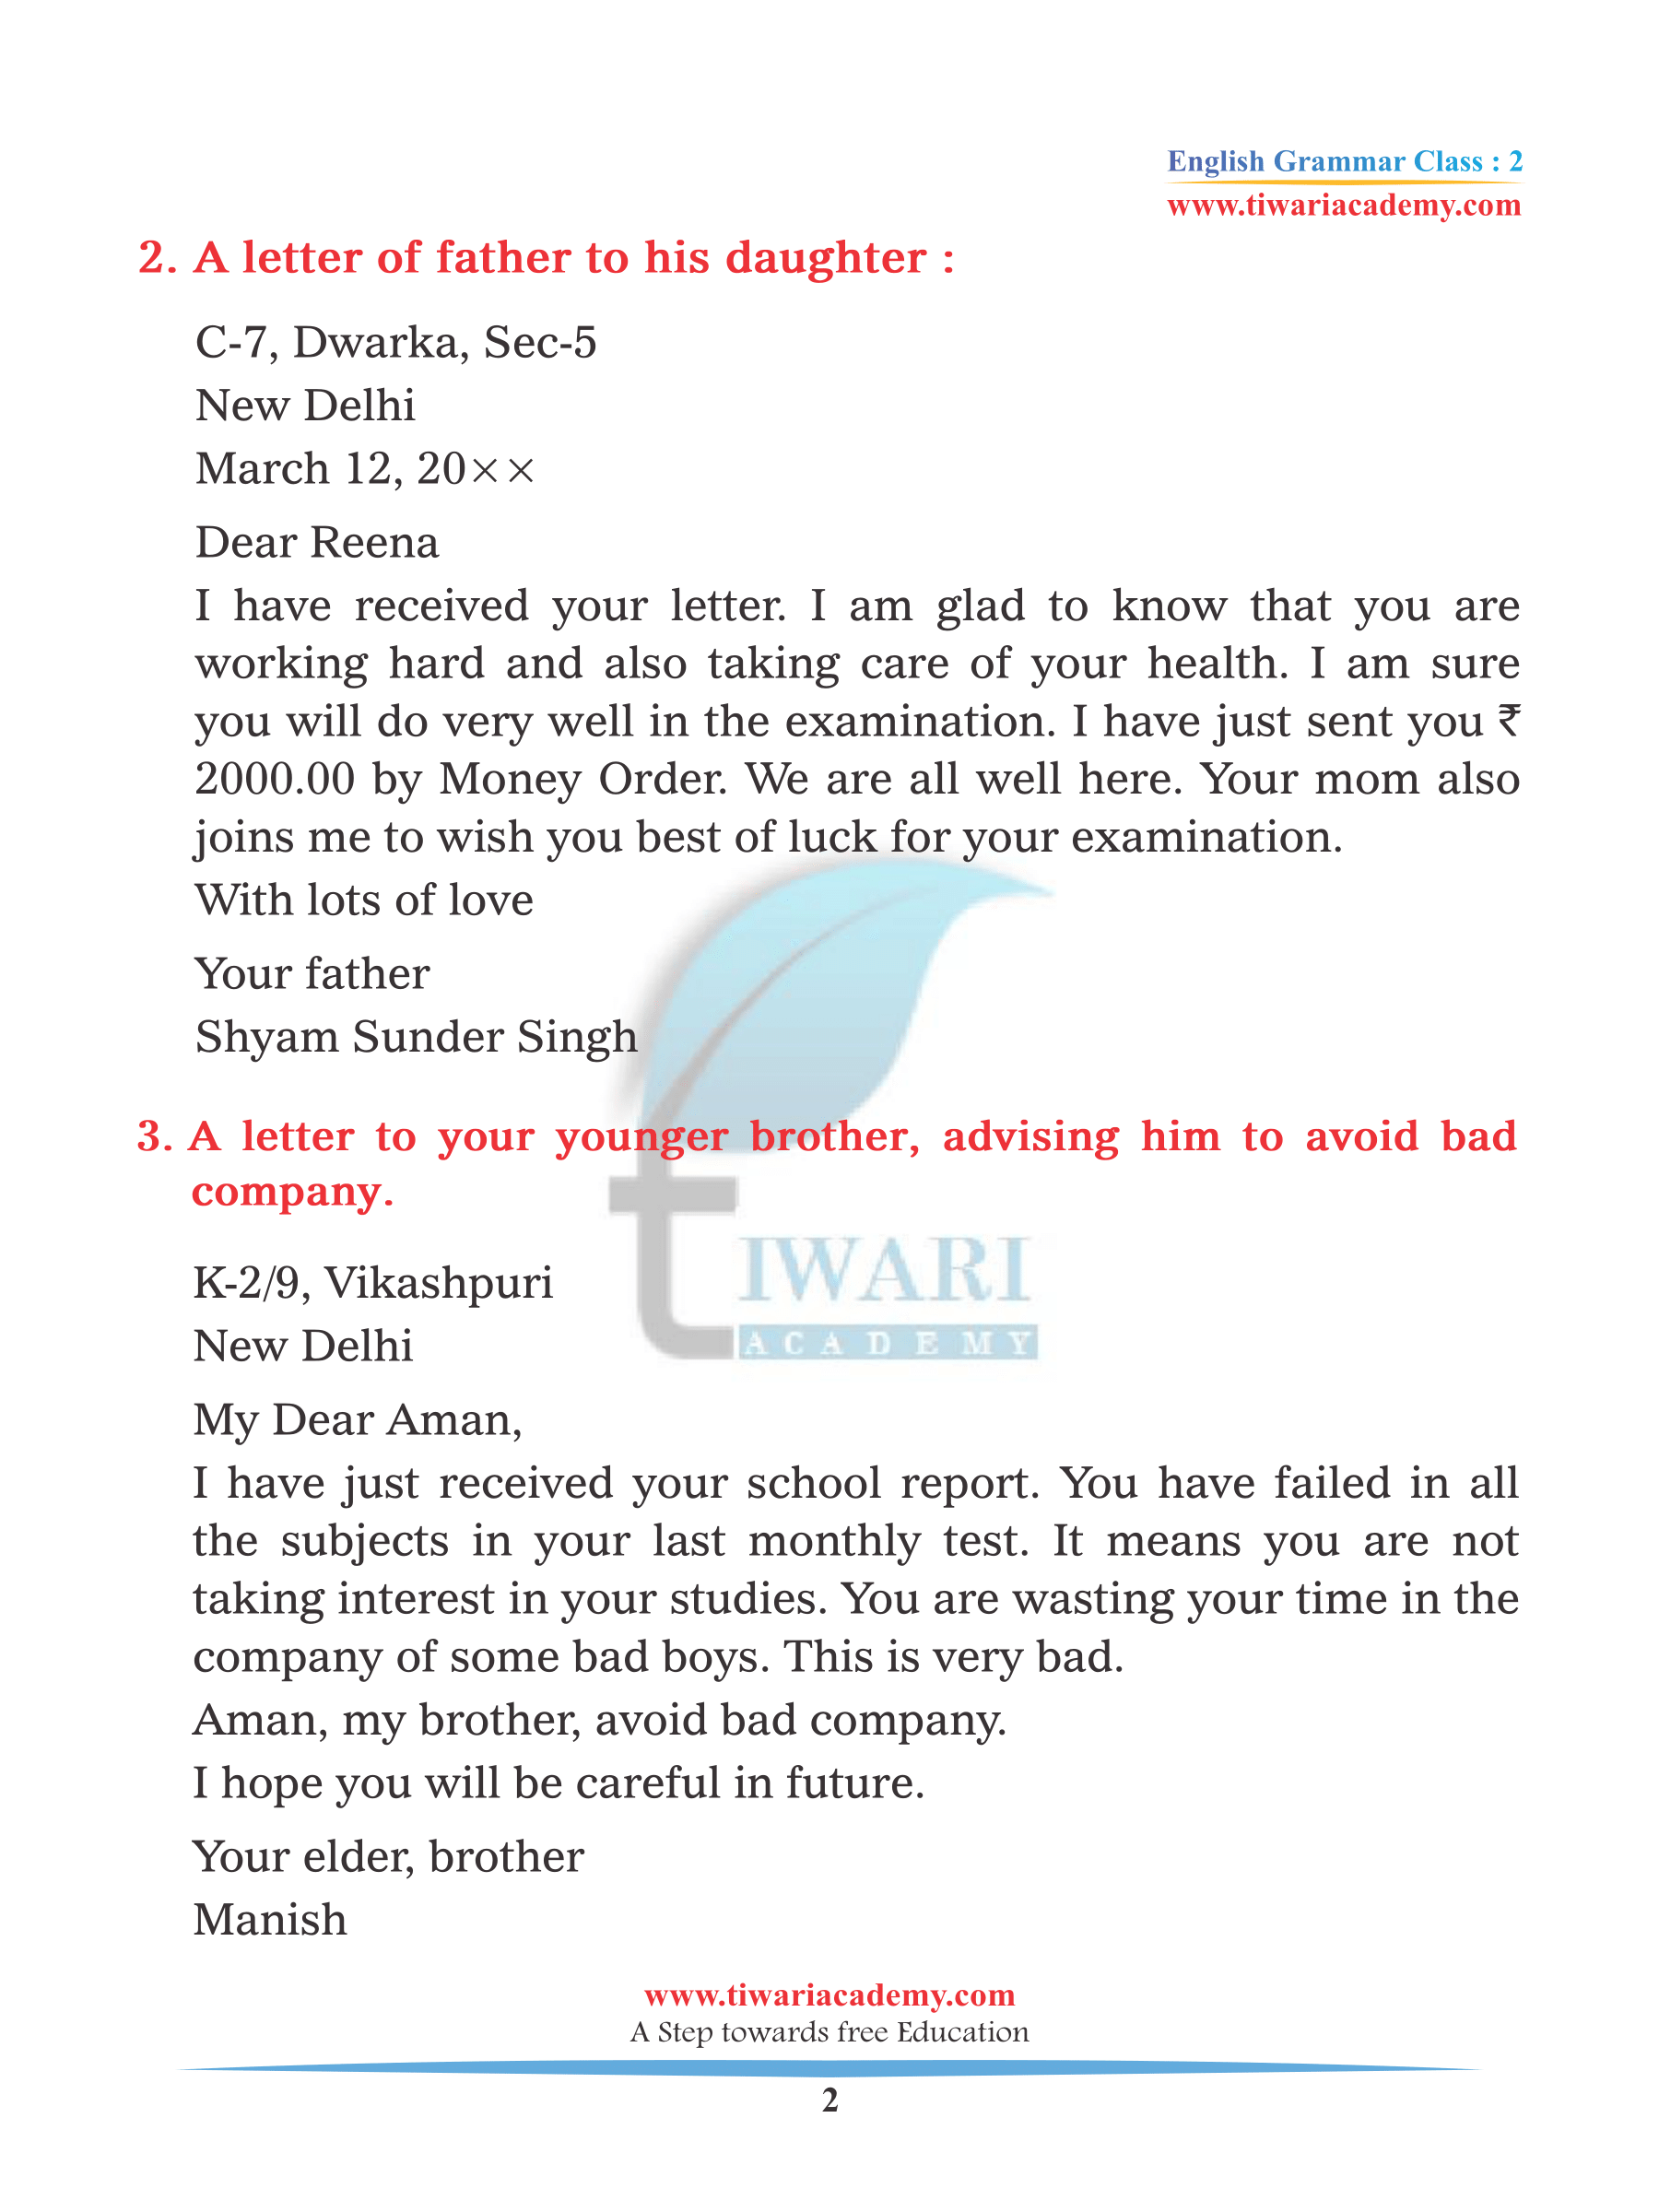 Class 2 English Grammar Letter and Application